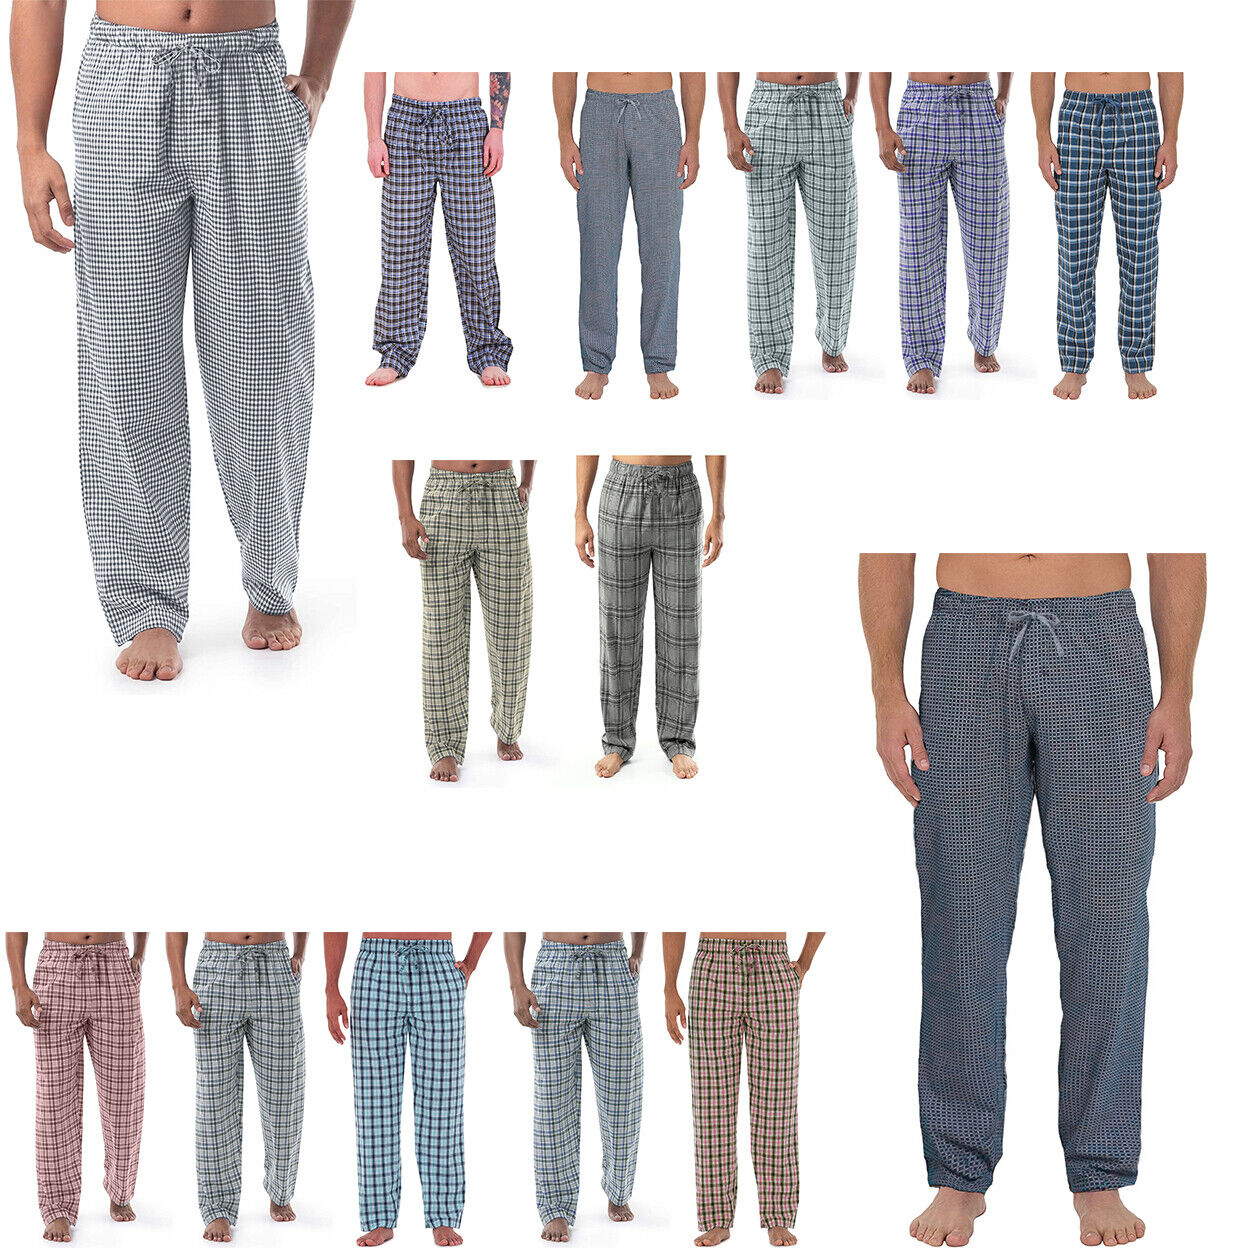 3-Pack: Men's Ultra-Soft Solid & Plaid Cotton Jersey Knit Comfy Sleep Lounge Pajama Pants - Plaid, Small